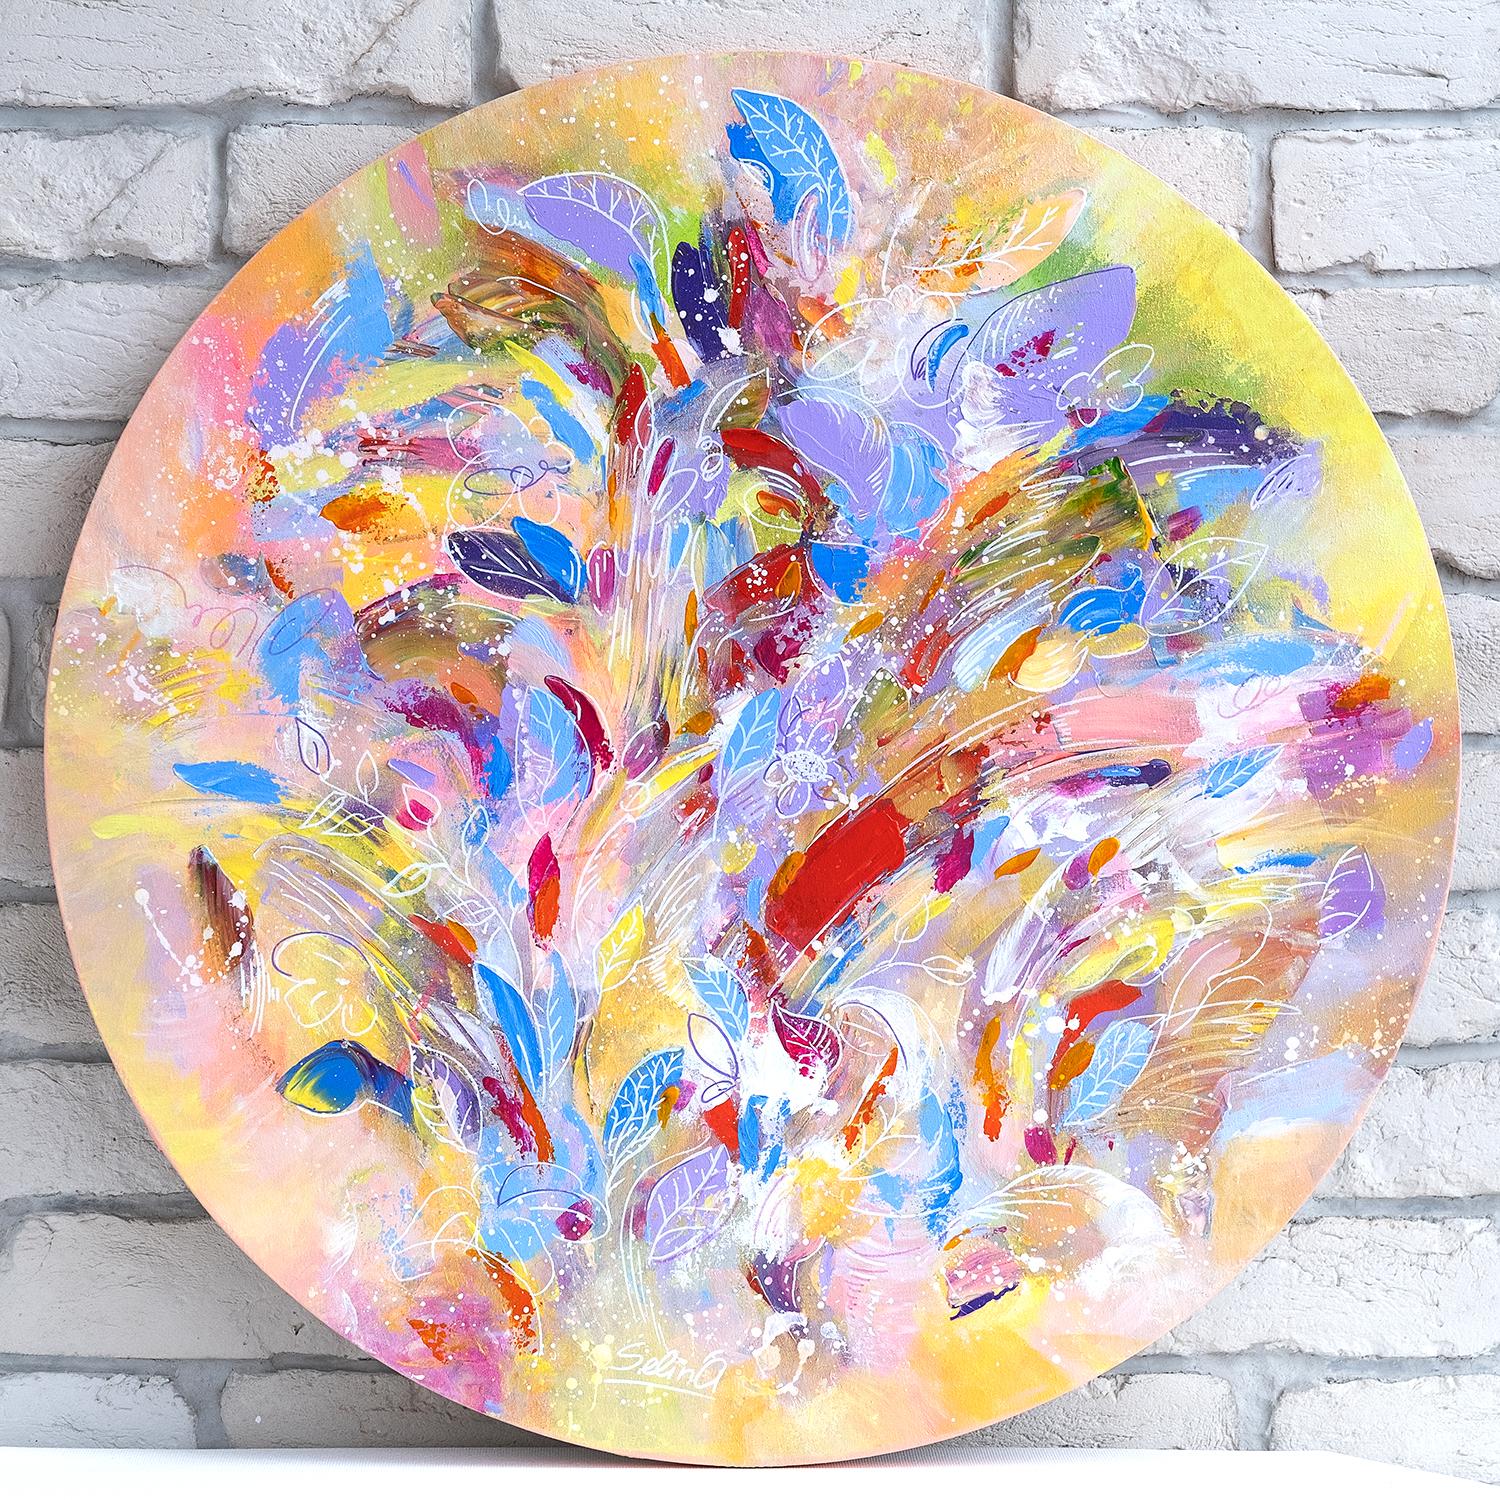 The bright day, Modern Colorful Abstract Painting 70 cm diameter by Anna Selina